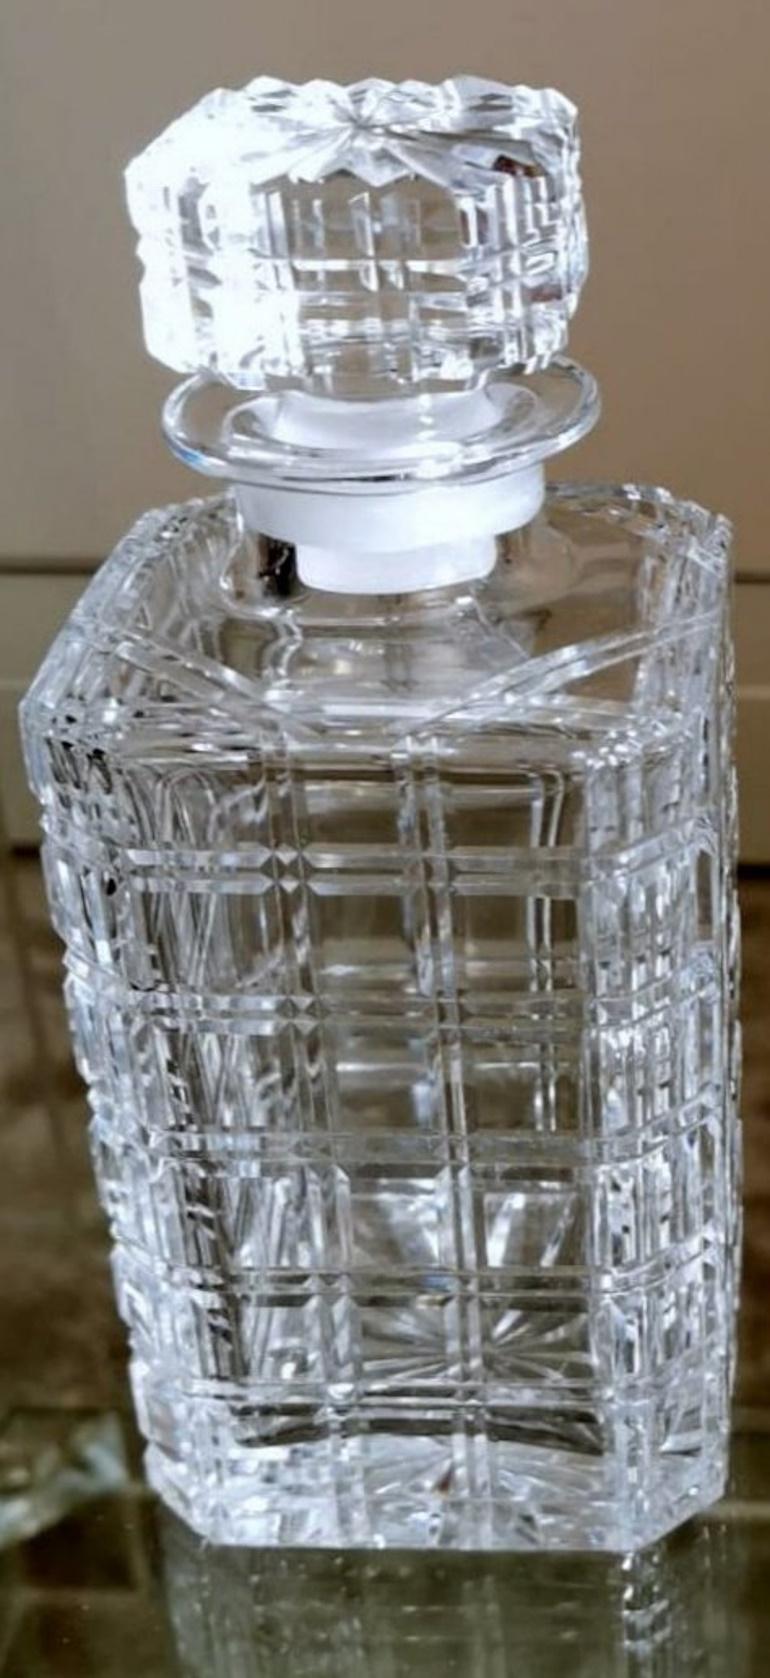 Italian Florentine Handcrafted Crystal Bottle Ground, Cut And Polished By Hand For Sale